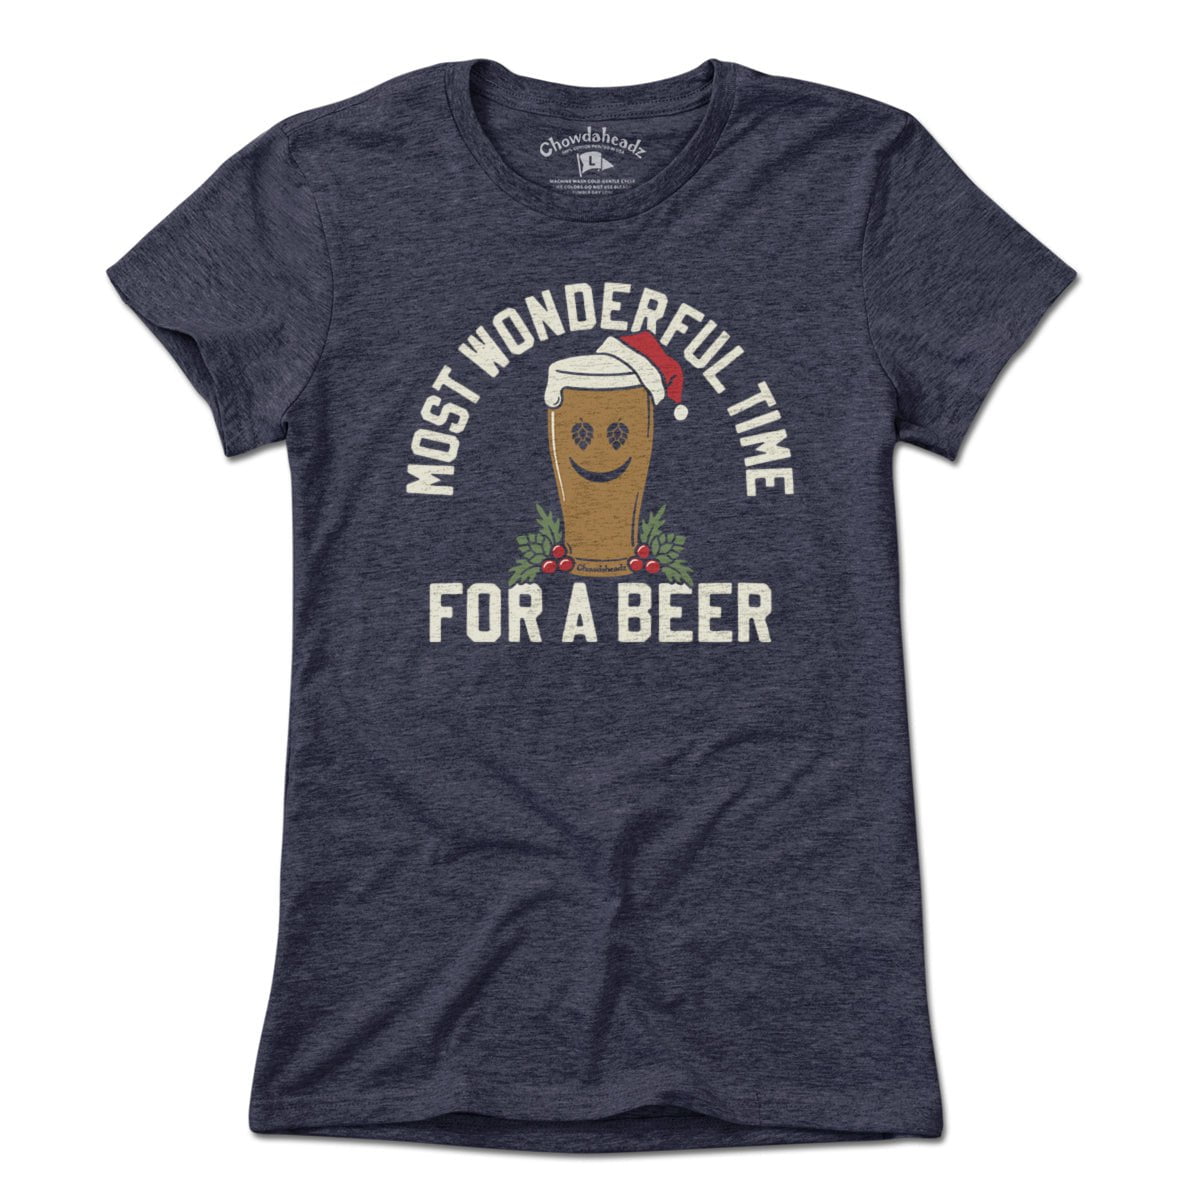 Most Wonderful Time For A Beer T-shirt - Chowdaheadz